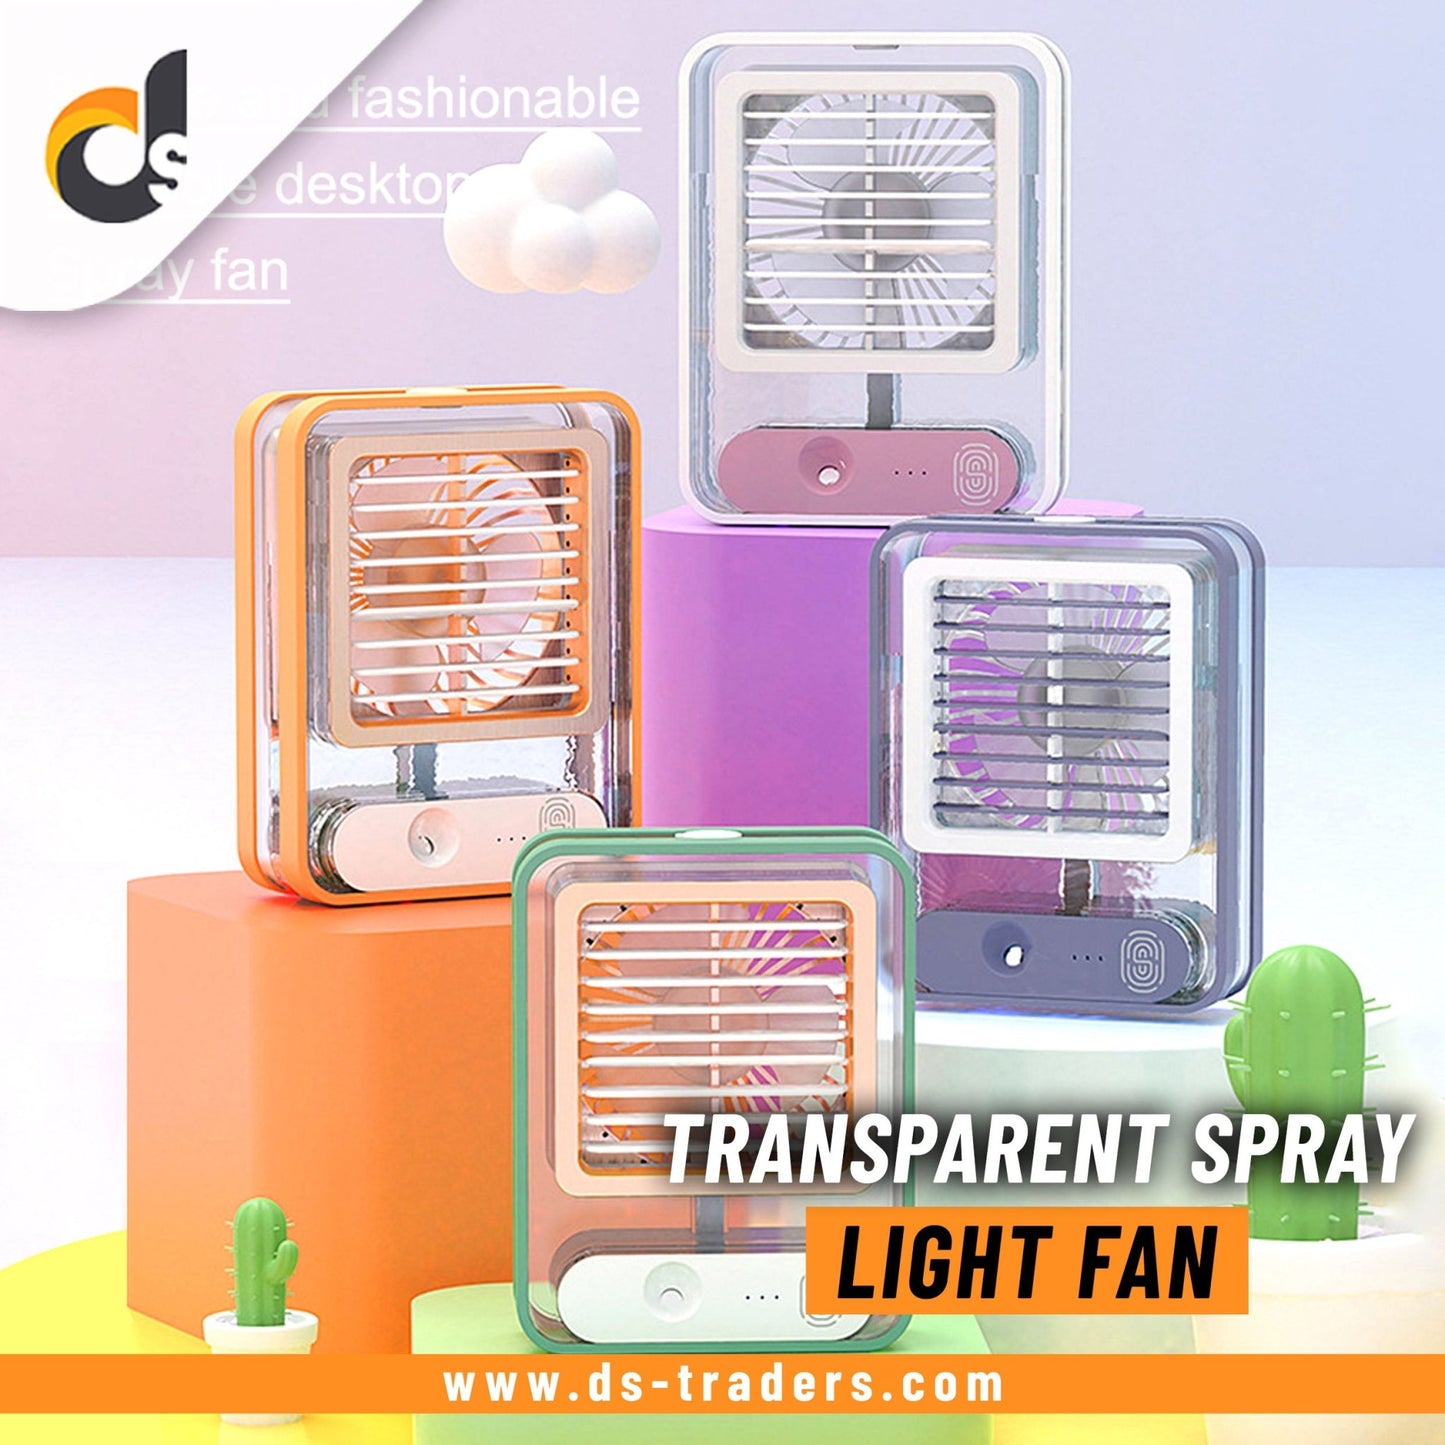 Portable LED Desk Fan with Mist Spray. - DS Traders